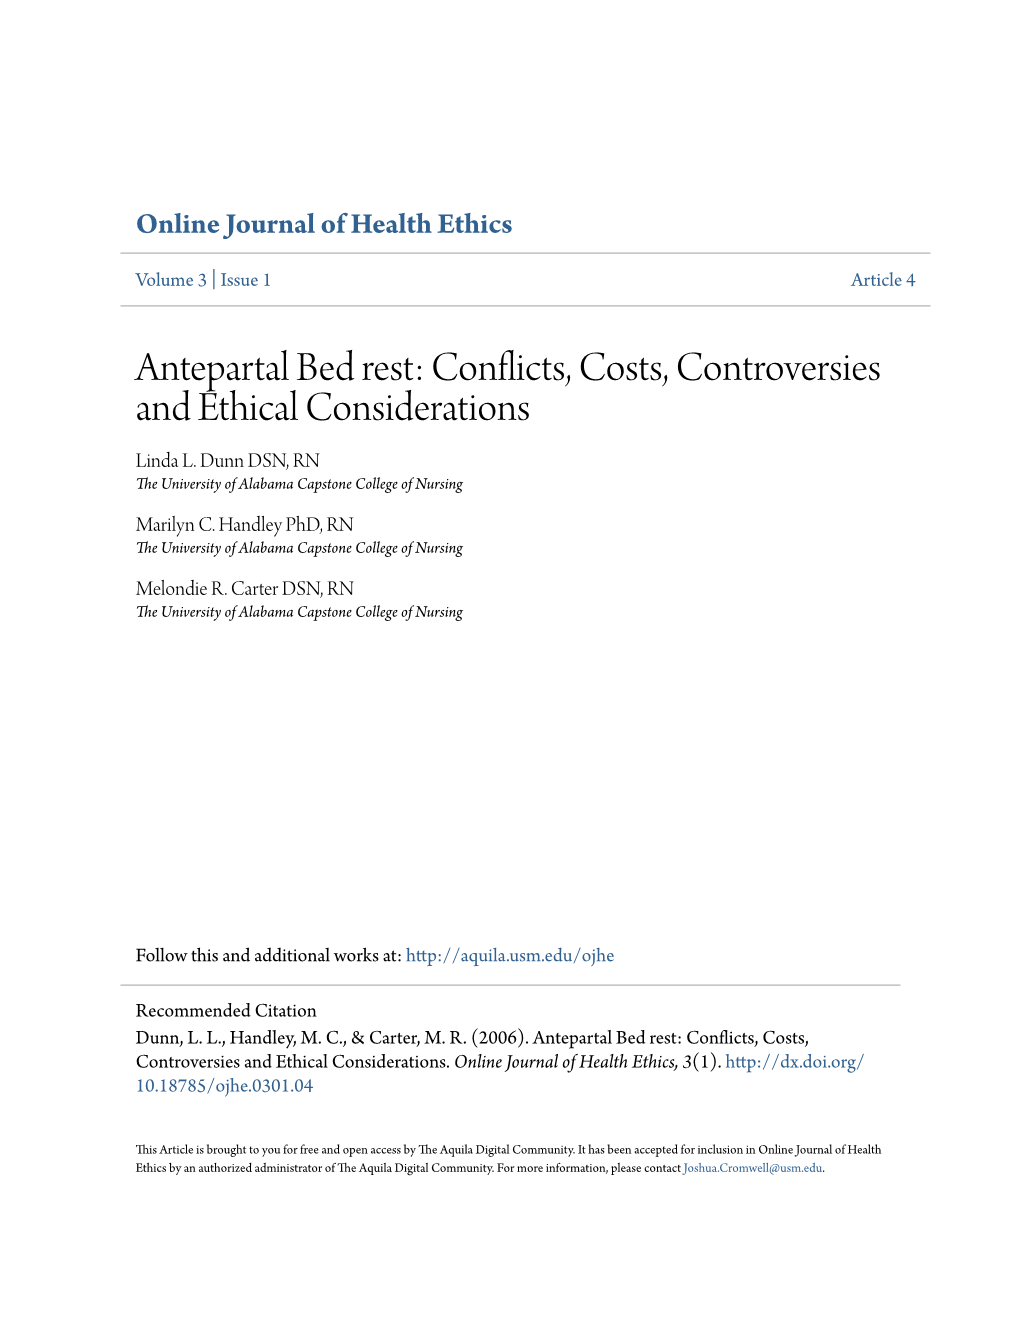 Antepartal Bed Rest: Conflicts, Costs, Controversies and Ethical Considerations Linda L